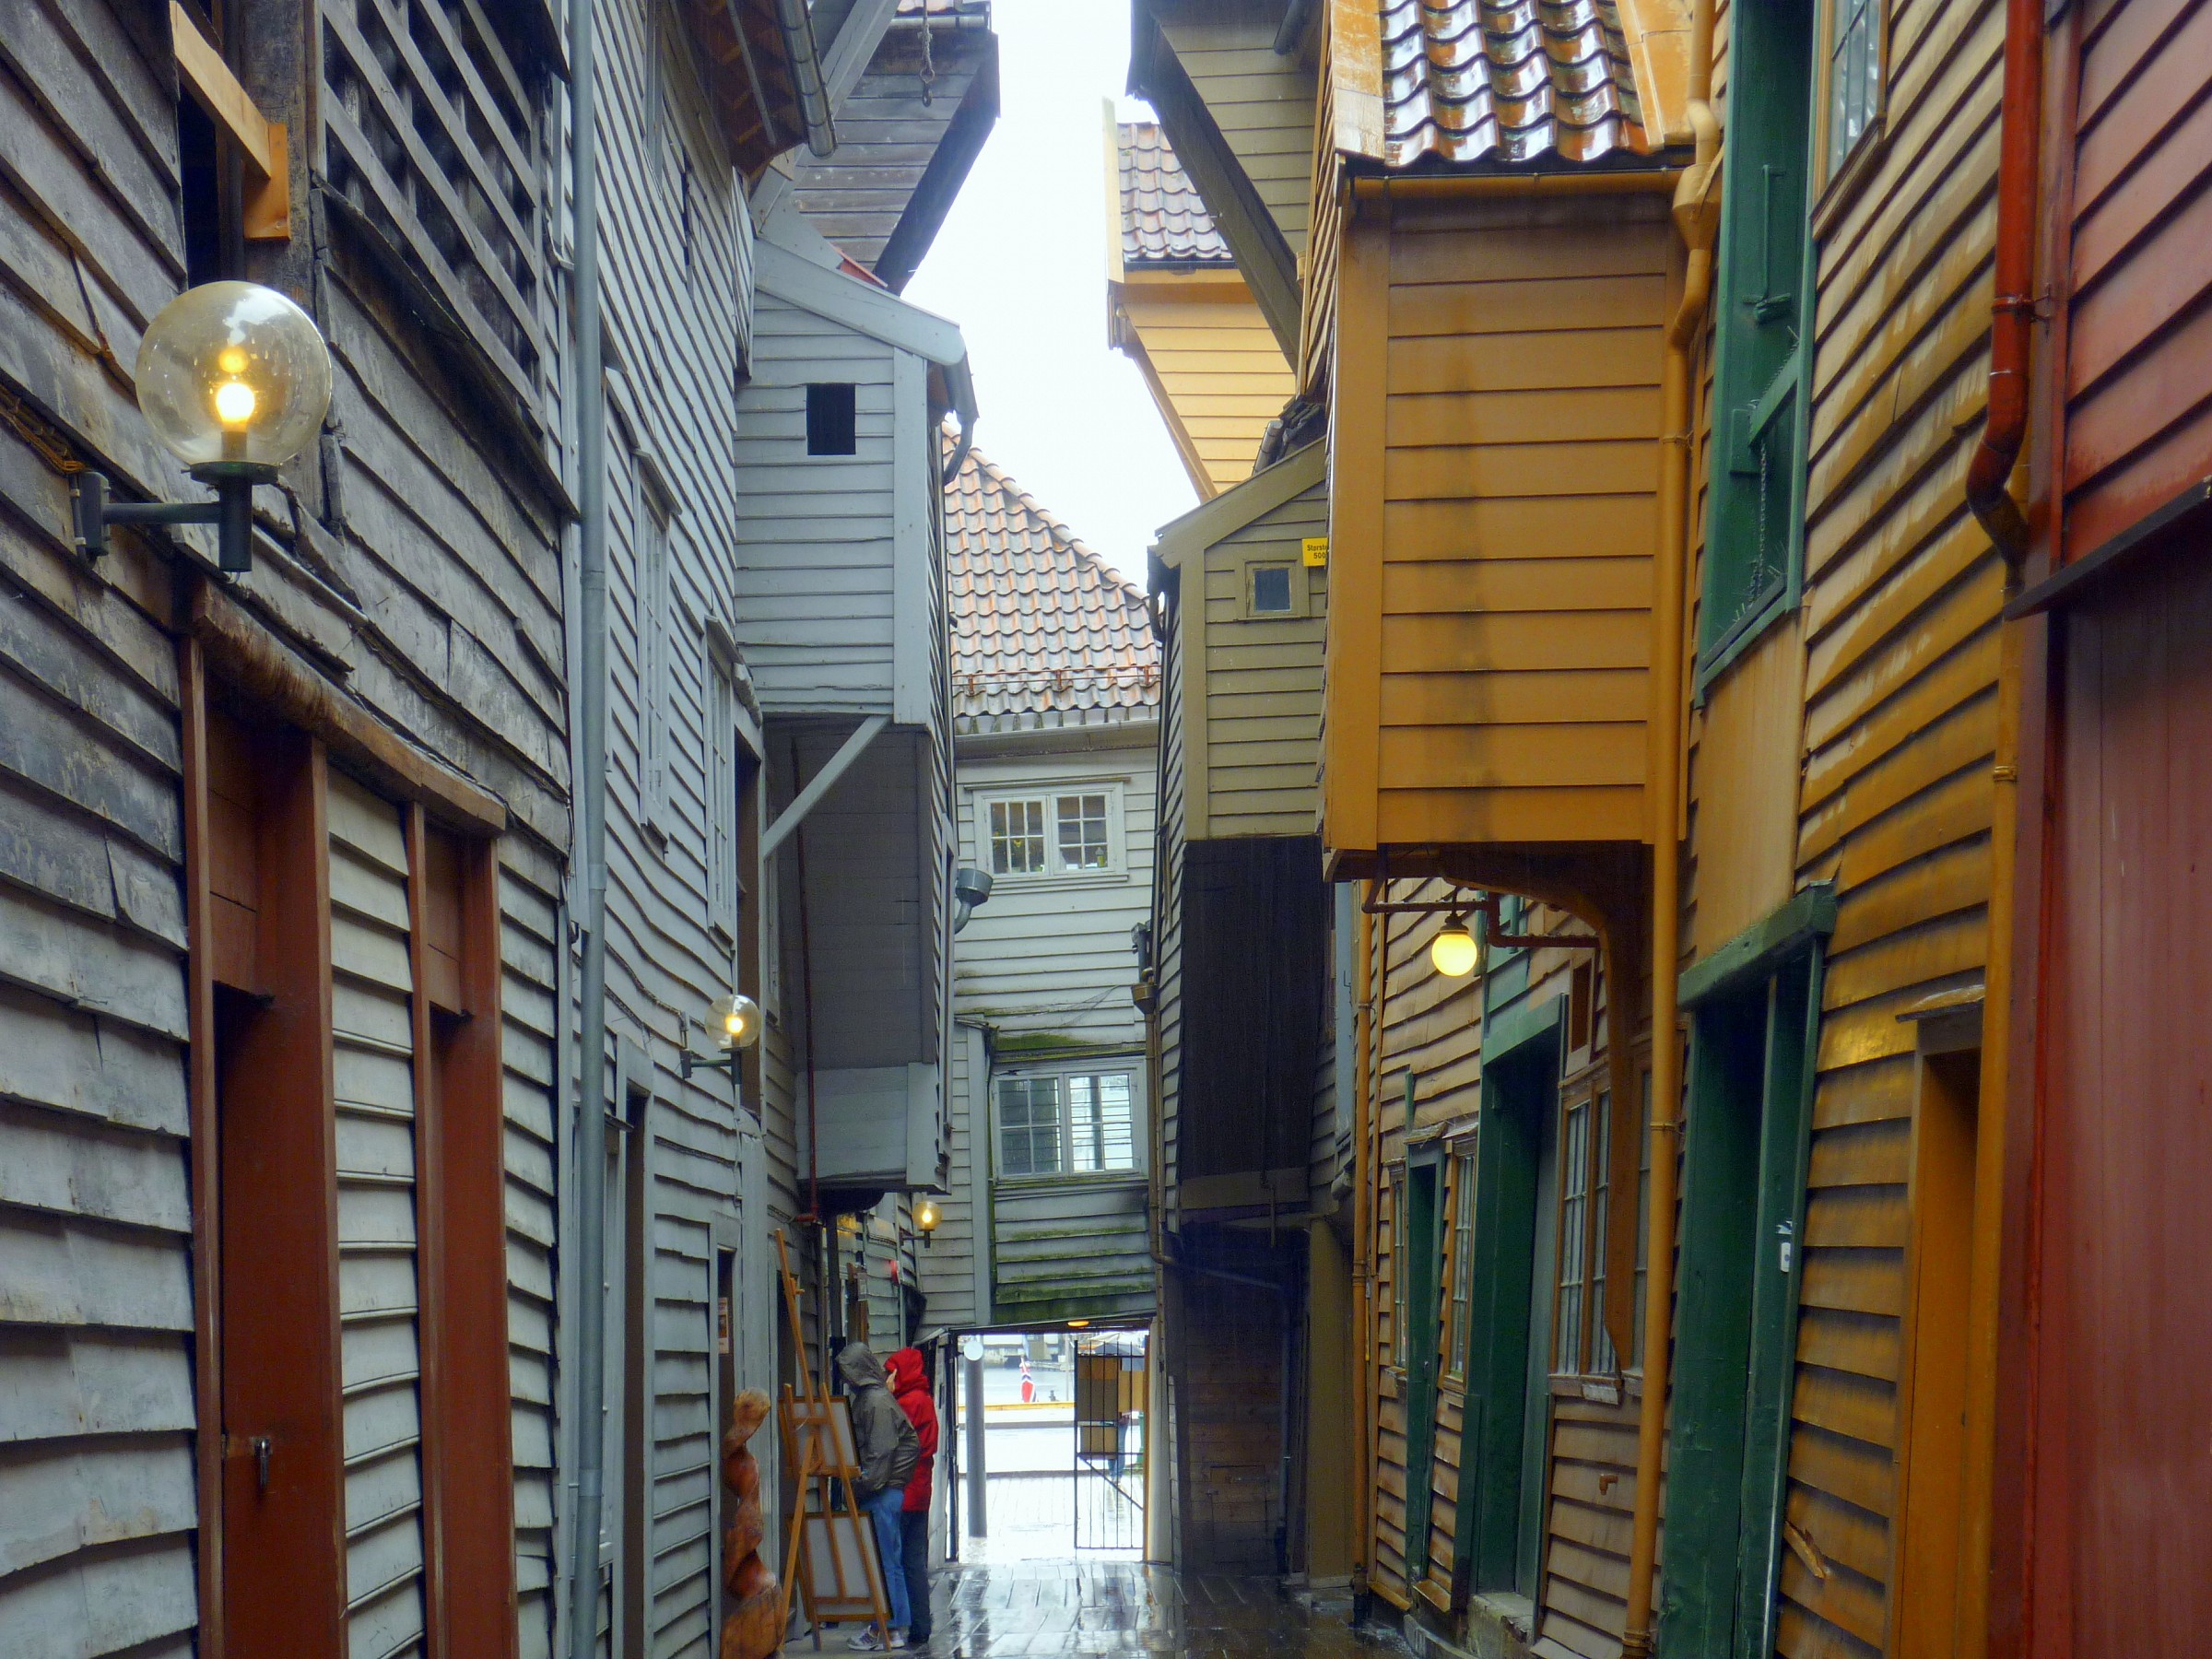 Among the narrow streets of Bergen...